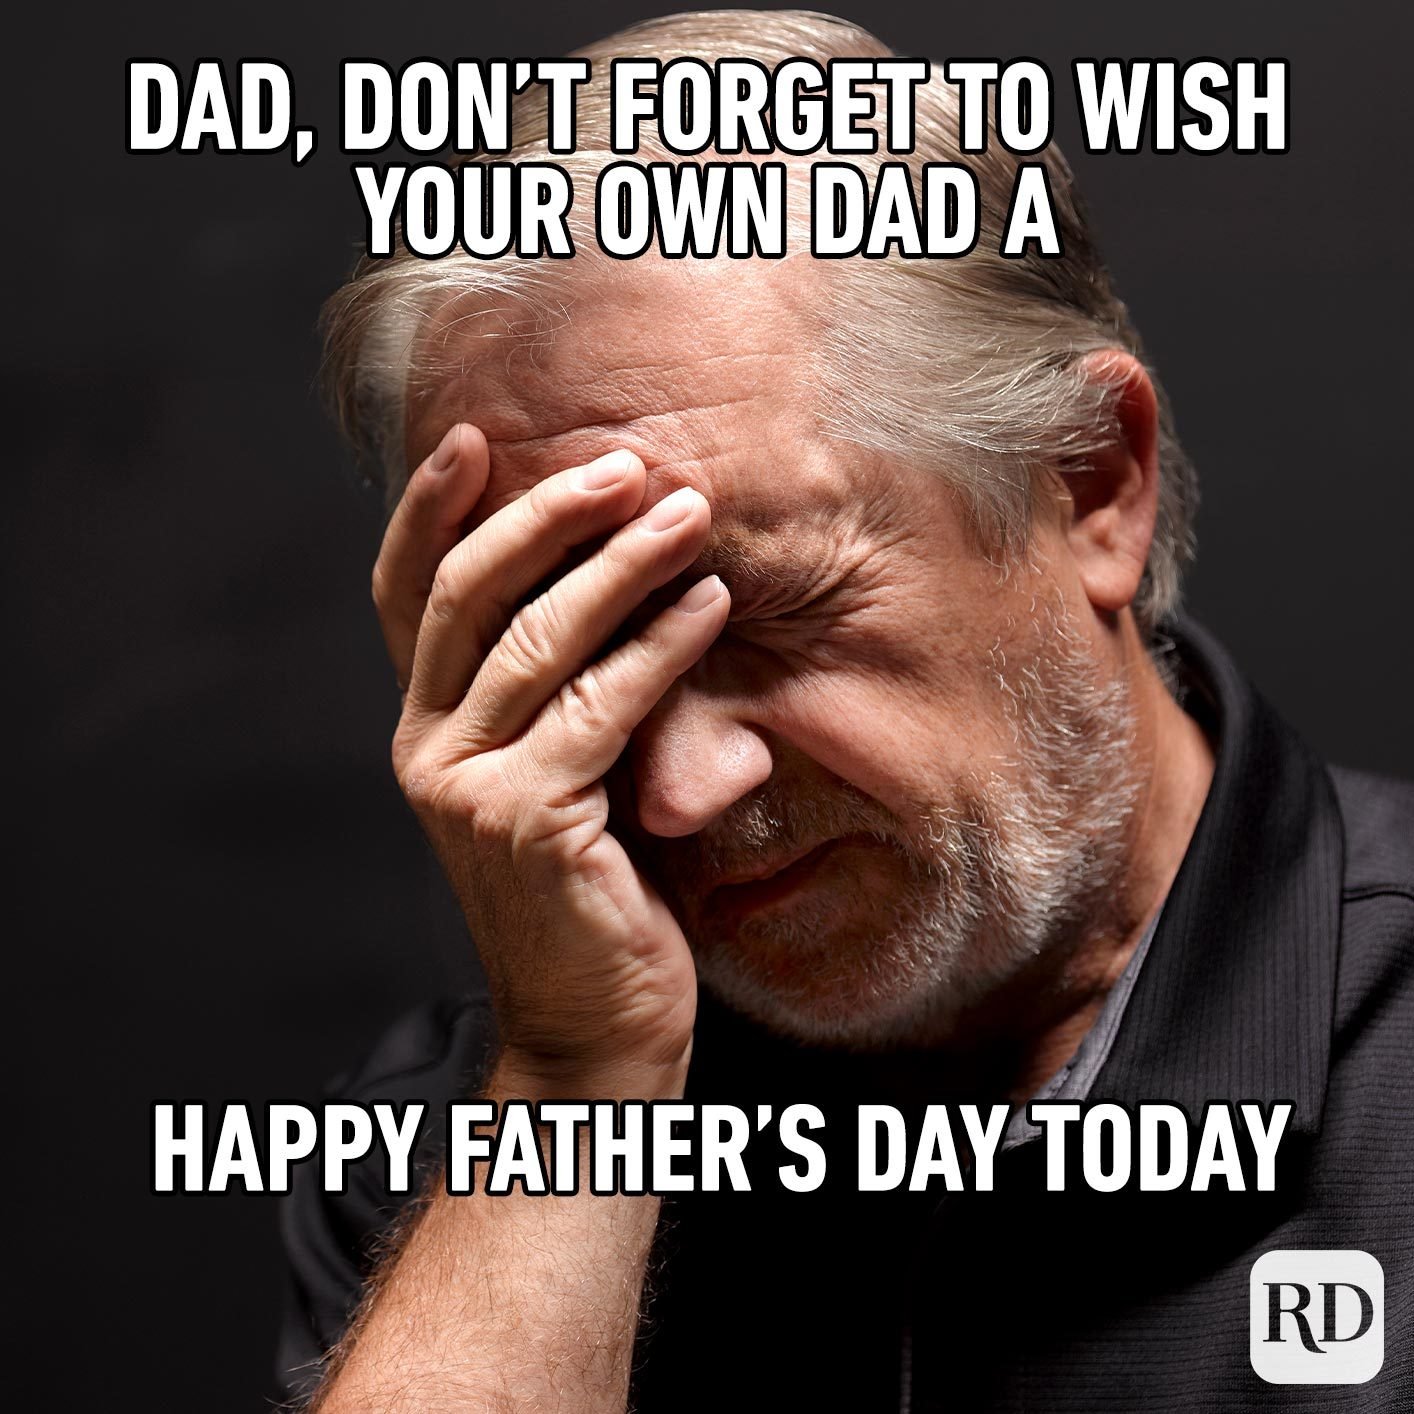 Man looking disappointed in himself. Meme text: Dad, don't forget to wish your own dad a Happy Father's Day today